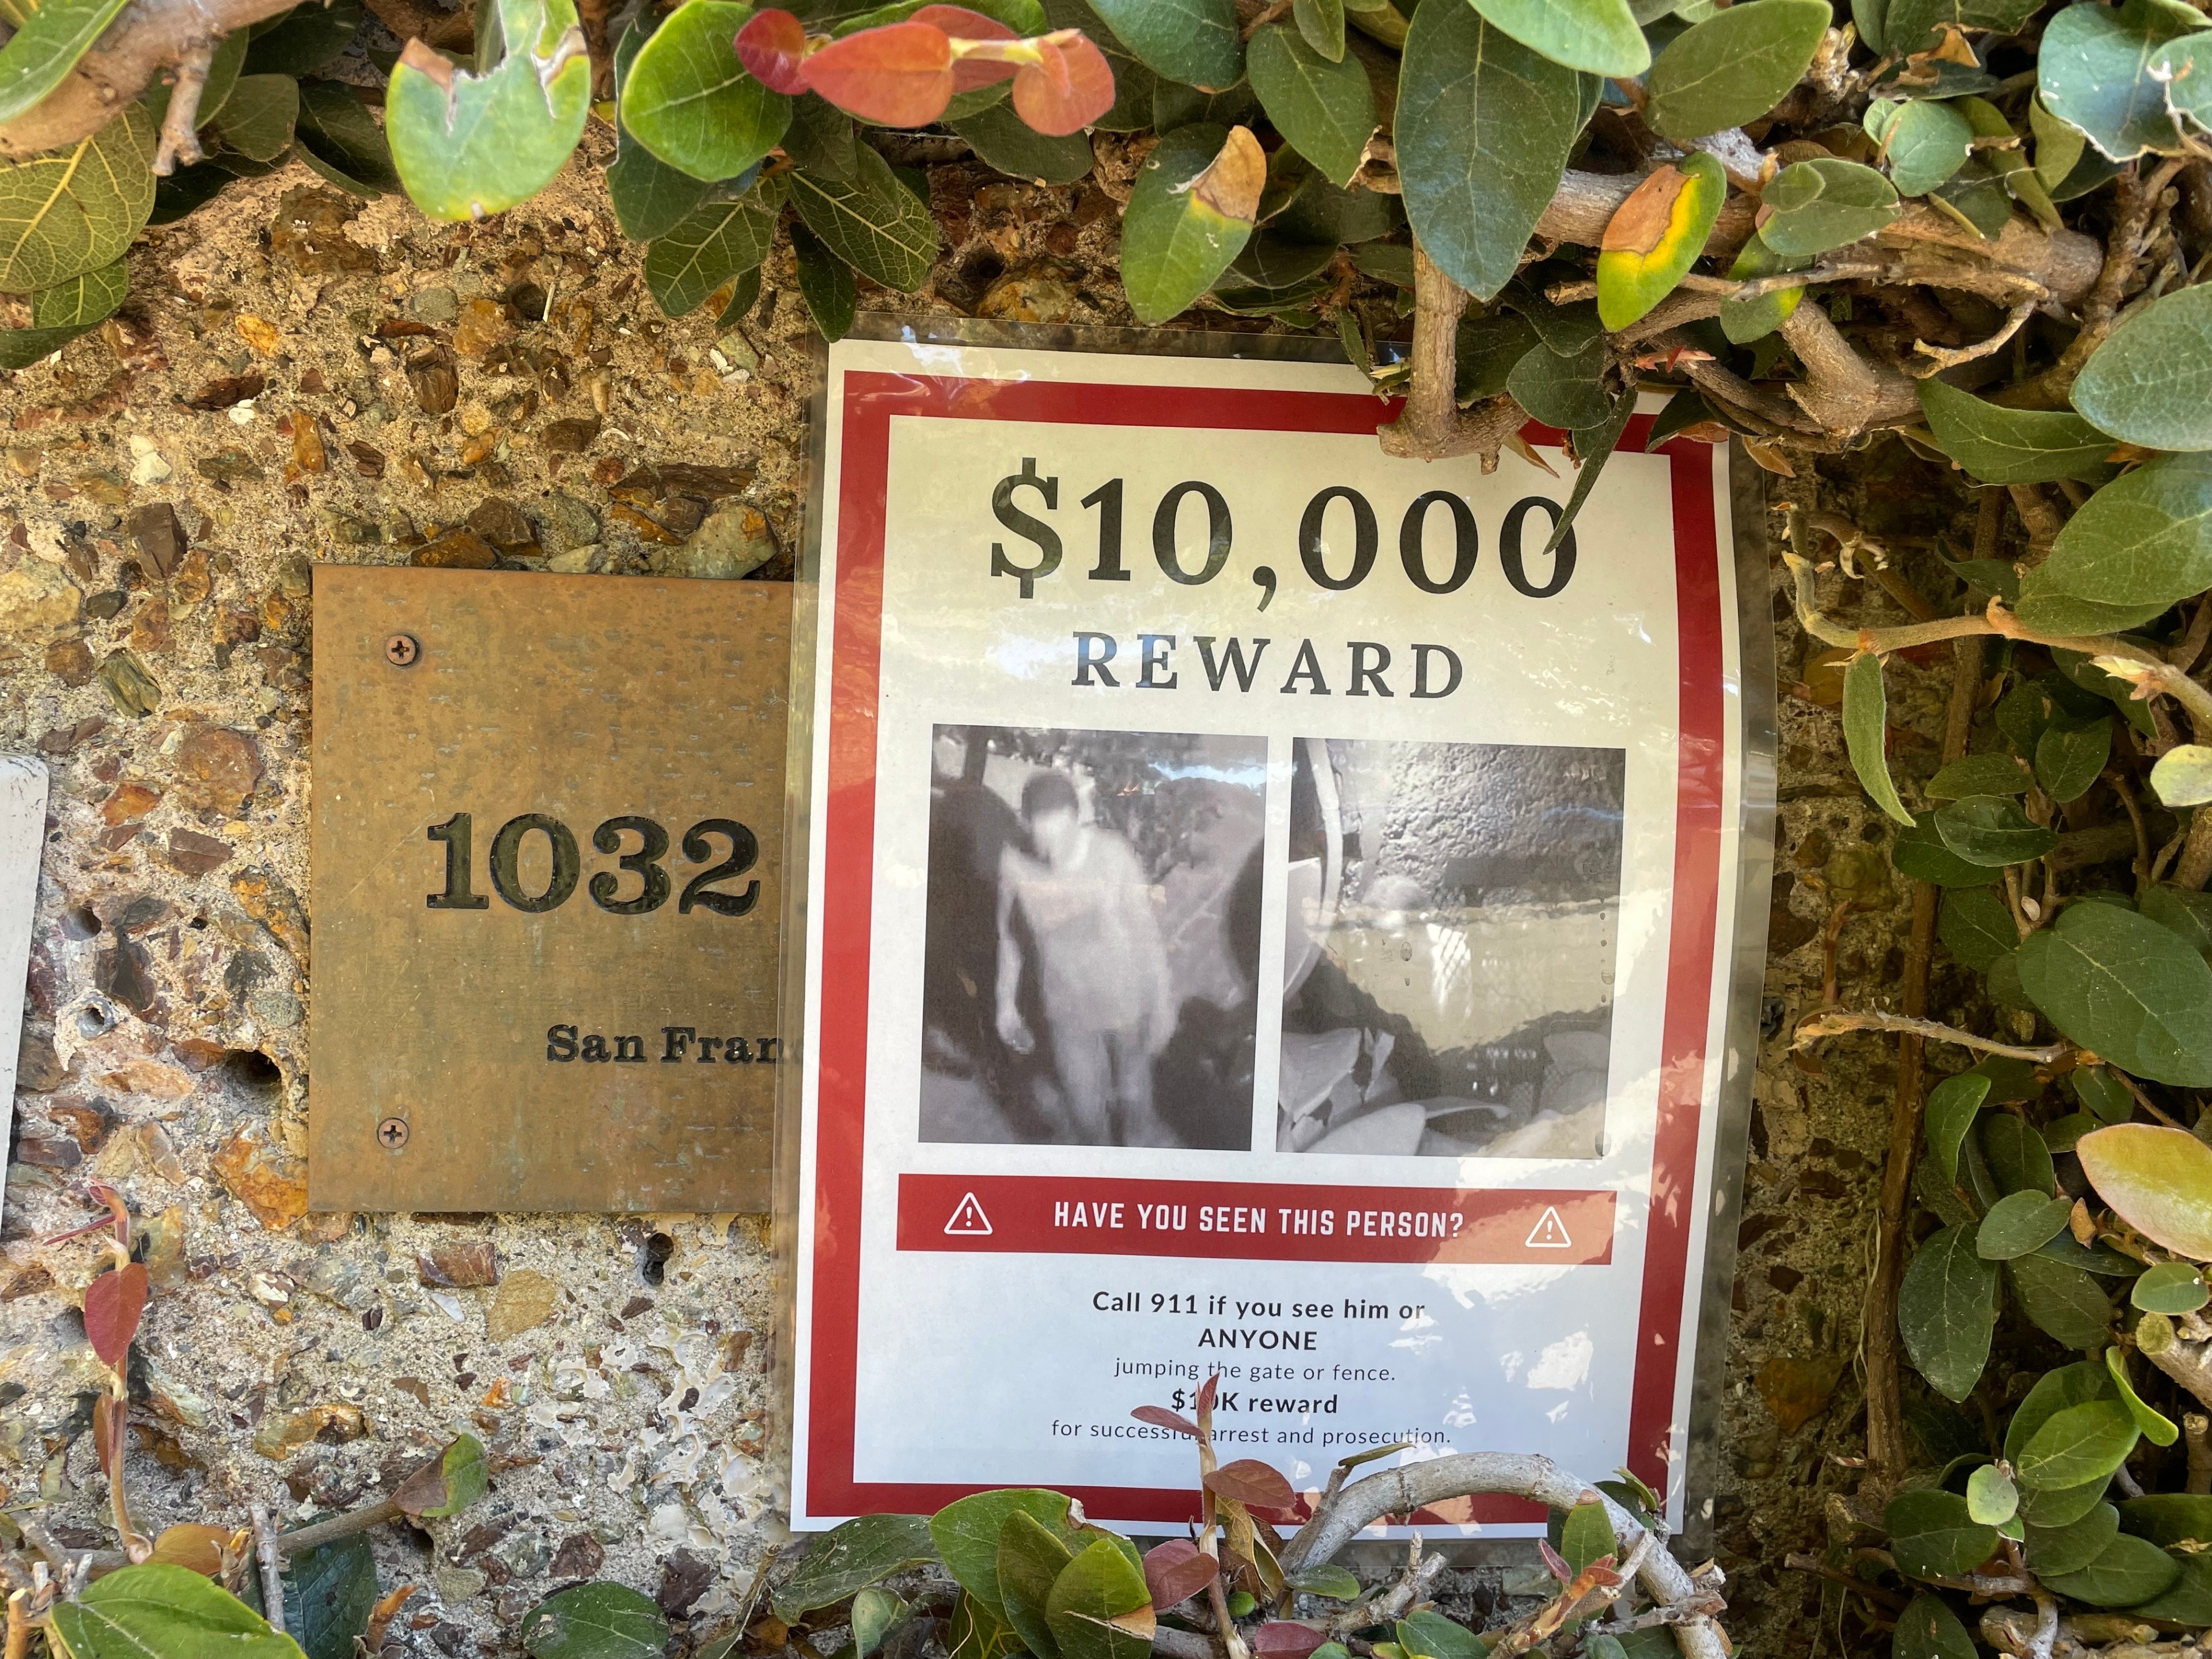 A mansion's entrance with a poster offering a $10,000 reward is seen in an upscale San Francisco neighborhood.